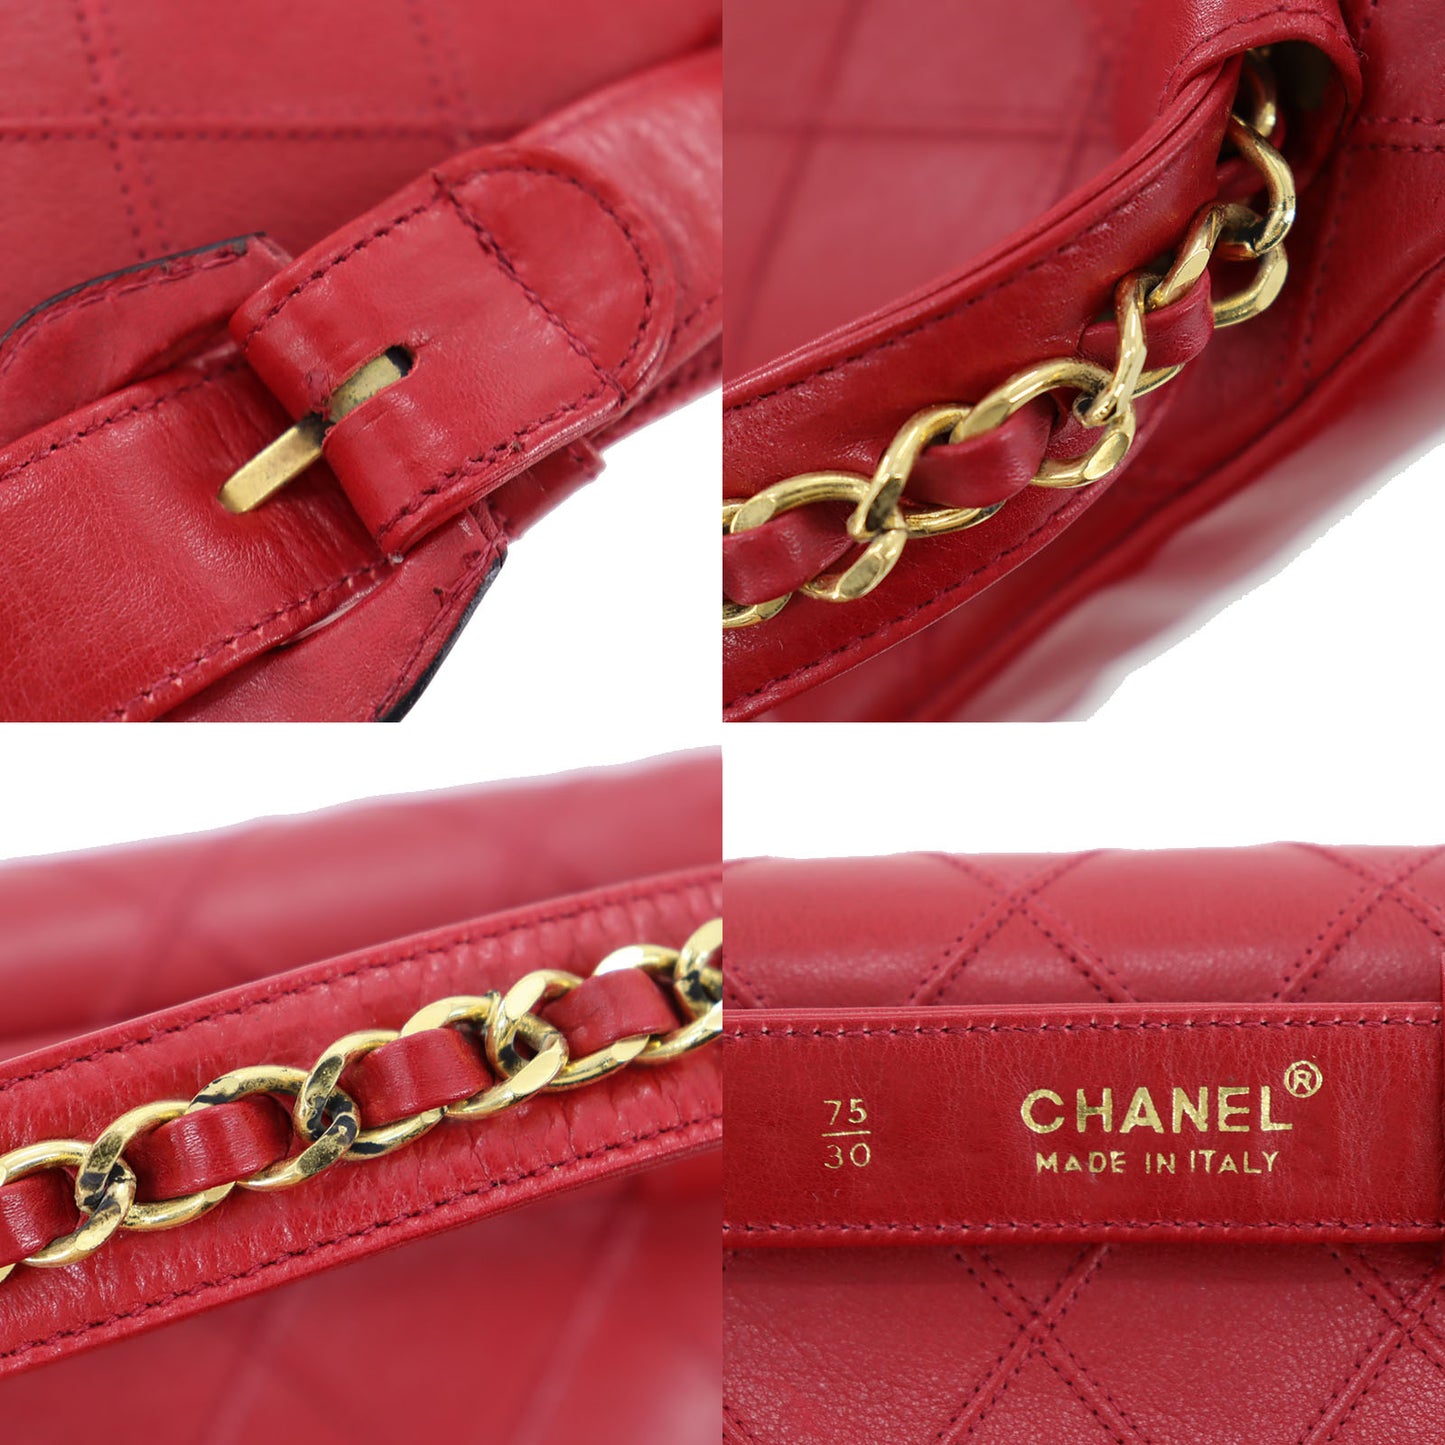 CHANEL Bicolore Bum Bag Red Leather Lambskin #CD921